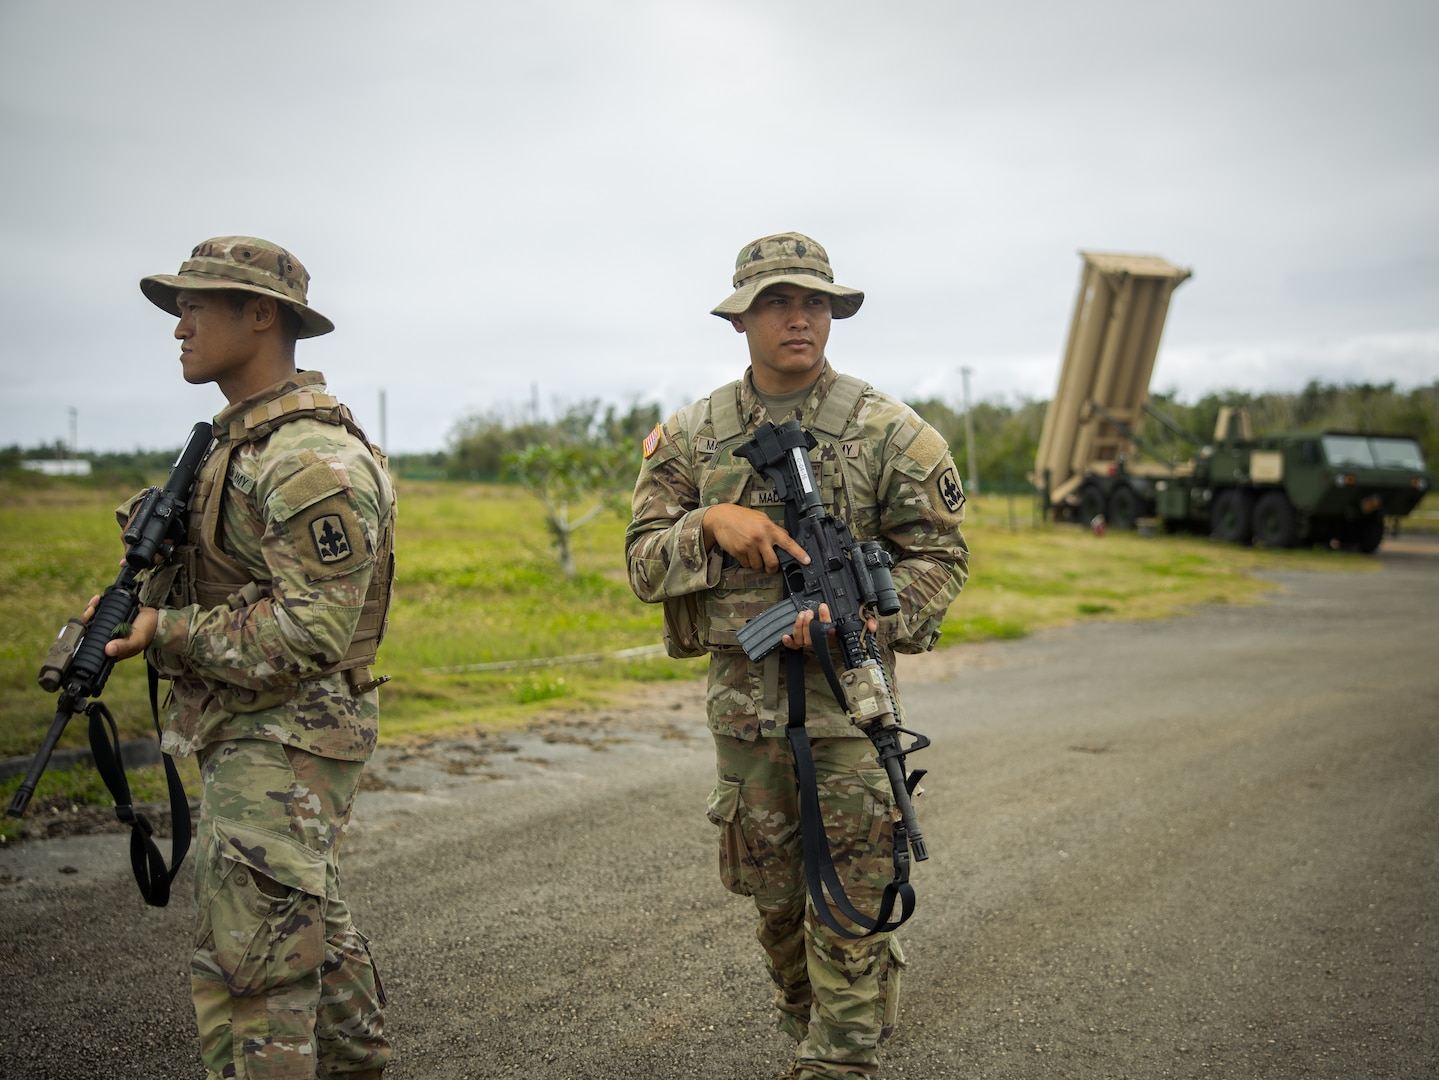 Guam National Guard soldiers assigned to Task Force Talon's Security Forces Company patrol the Terminal High Altitude Area Defense site "Excalibur" in Dededo, Guam, March 13, 2024. The THAAD battery, equipped with a state-of-the-art missile defense system, is tasked with defending Guam and its surrounding areas against ballistic missile threats. (U.S. Army Photo by Maj. Trevor Wild)